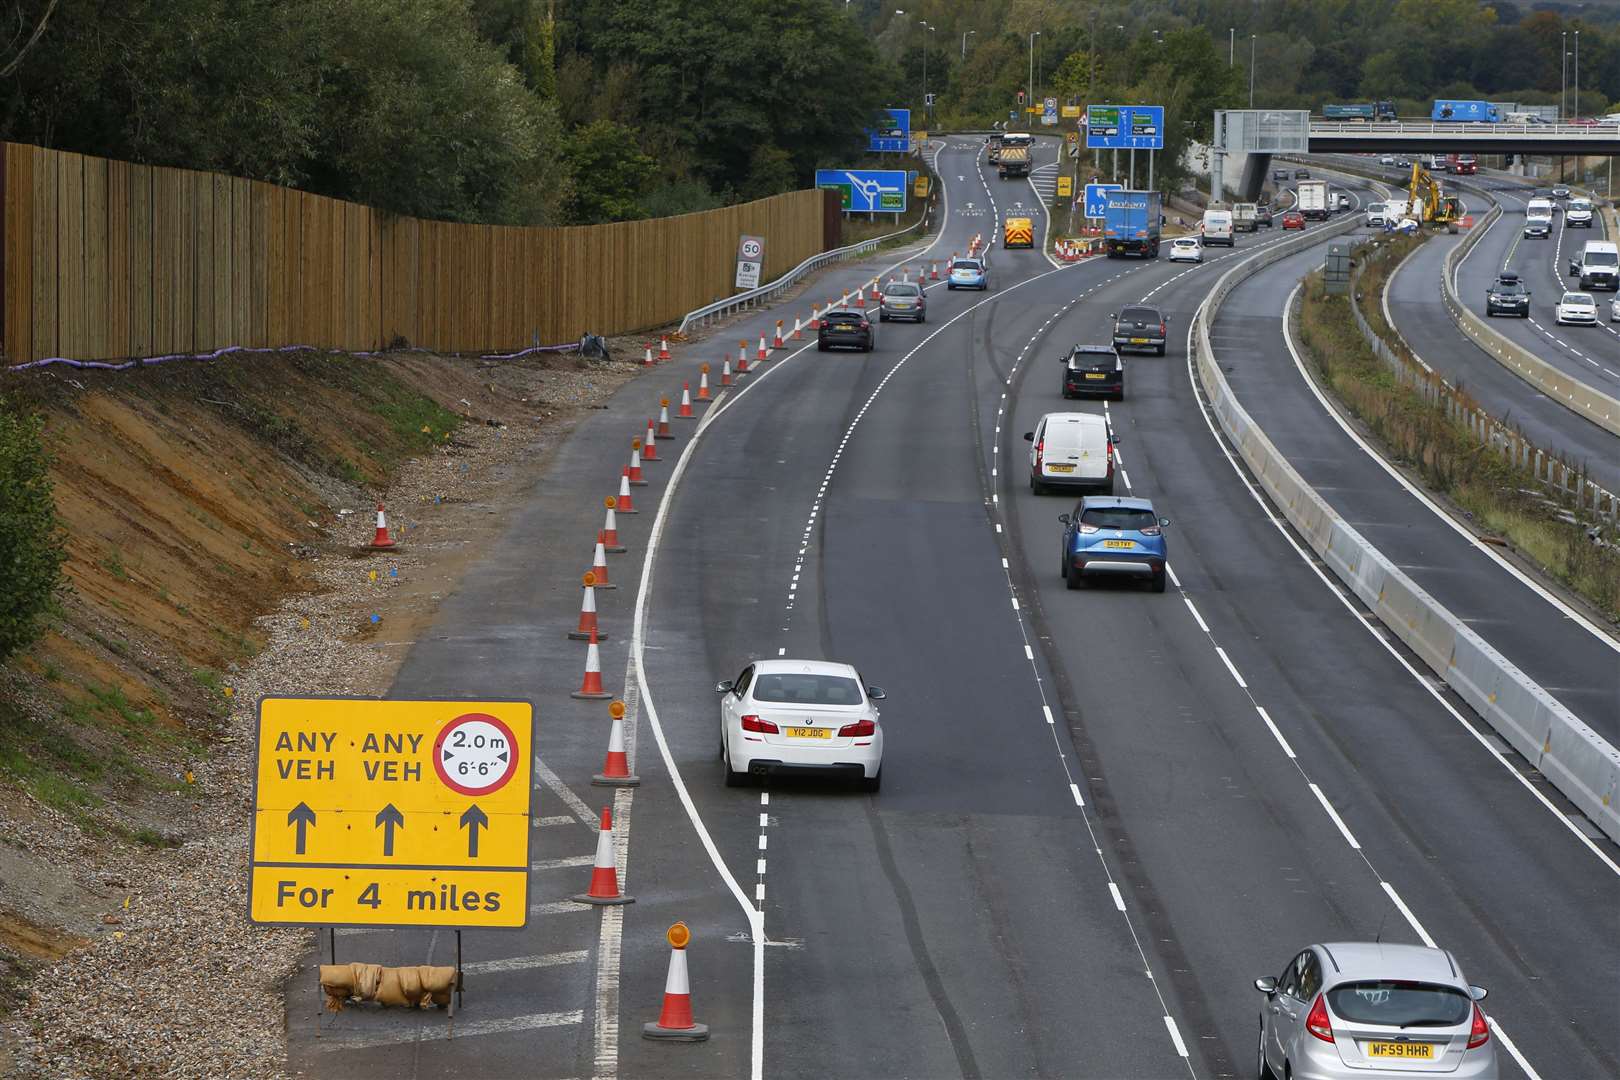 The roadworks run from junction 3 to junction 5